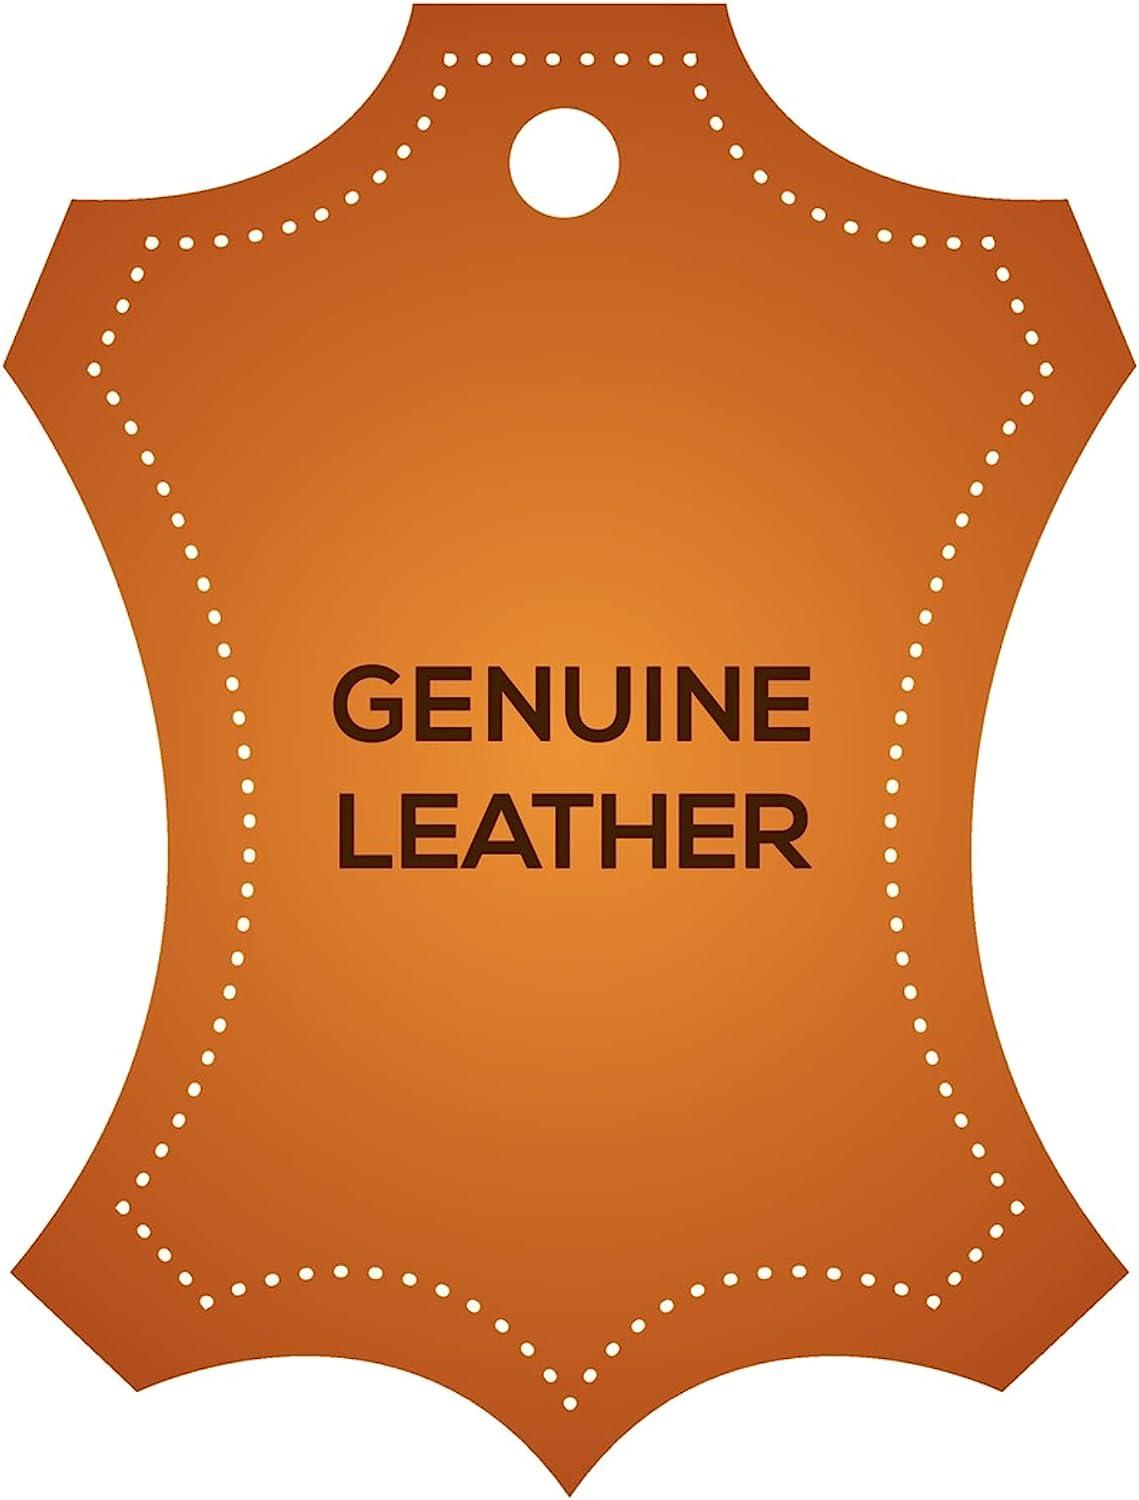 TOFL Genuine Top-Grain Leather Strap | 72 Inches Long | 1 inch Wide | 1/16 inch Thick (4-5 oz) | 1 Leather Strip for DIY Arts & Craft Projects